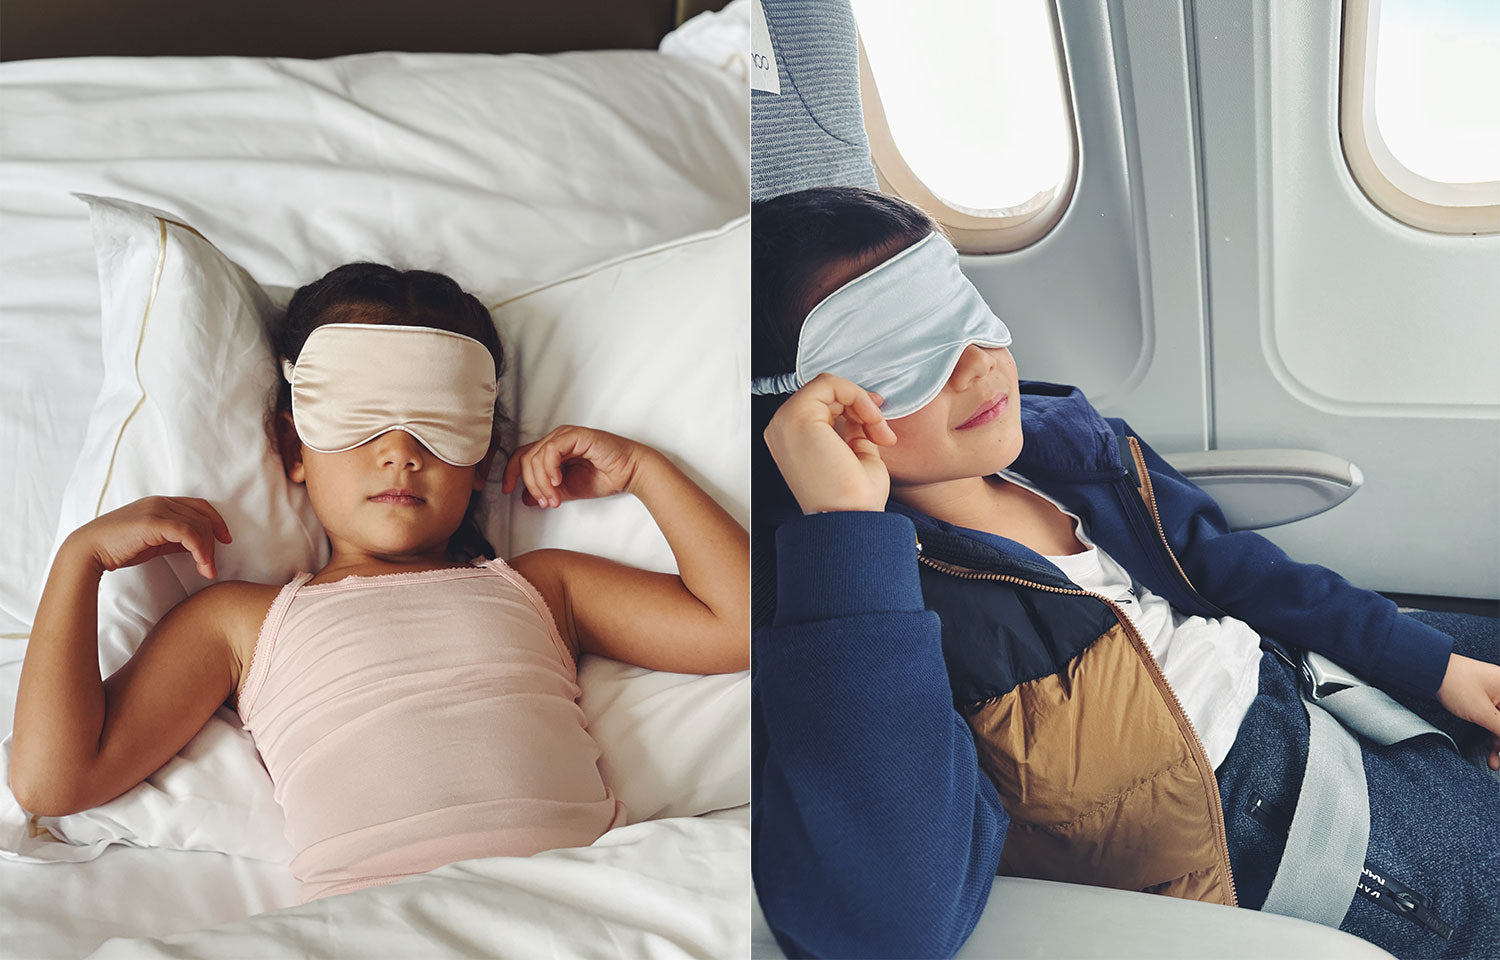 Travelling with Tots: A Guide to Stress-Free Family Adventures - Combat Jet Lag with Just Peachy's Sleep Mask